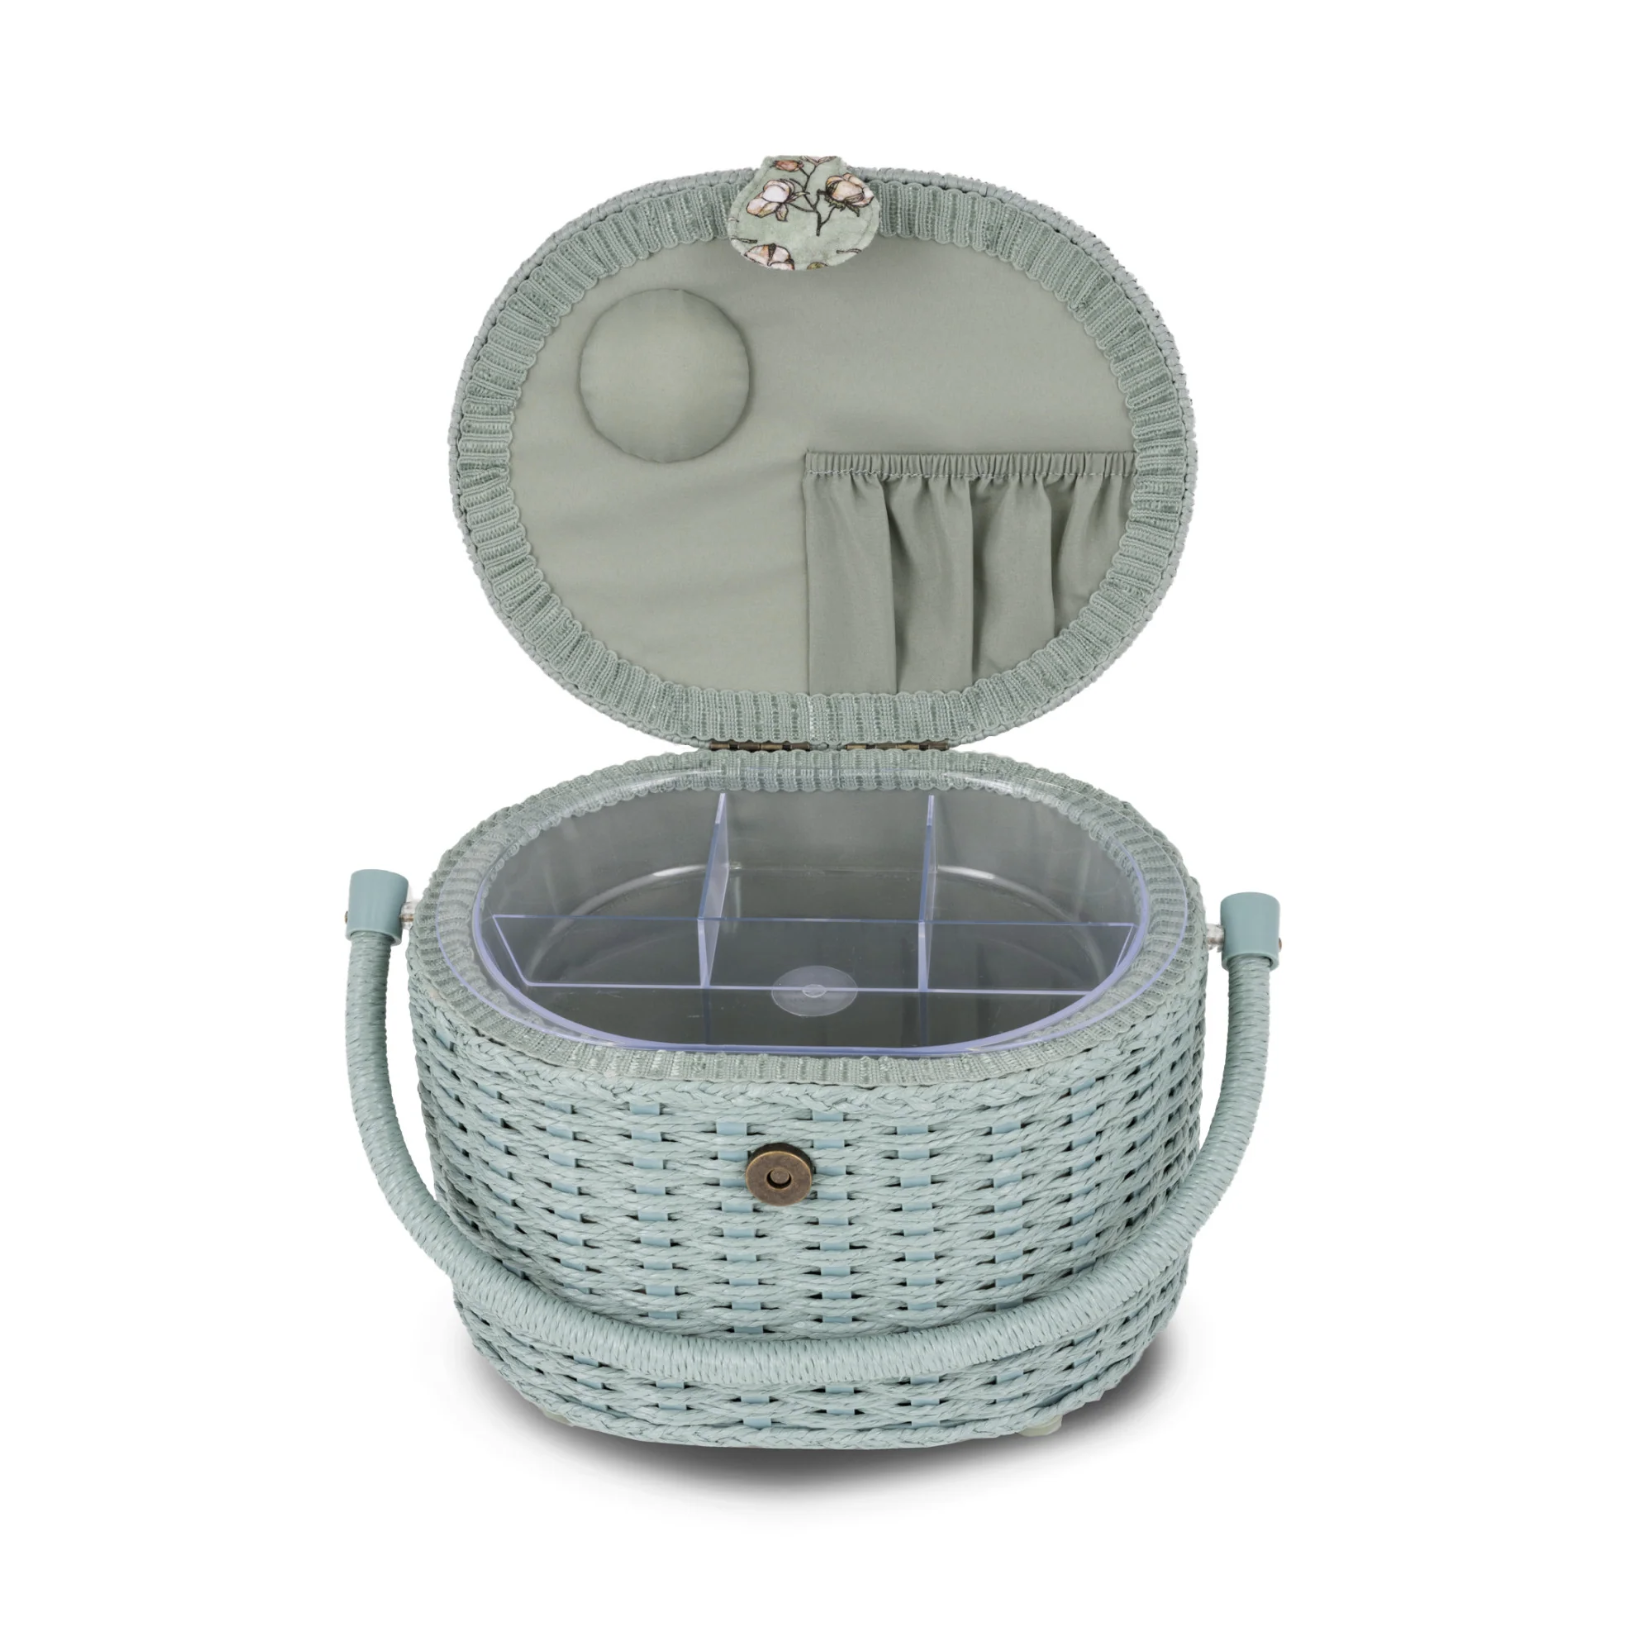 Small Oval Weaved - Sewing Basket by DRITZ®